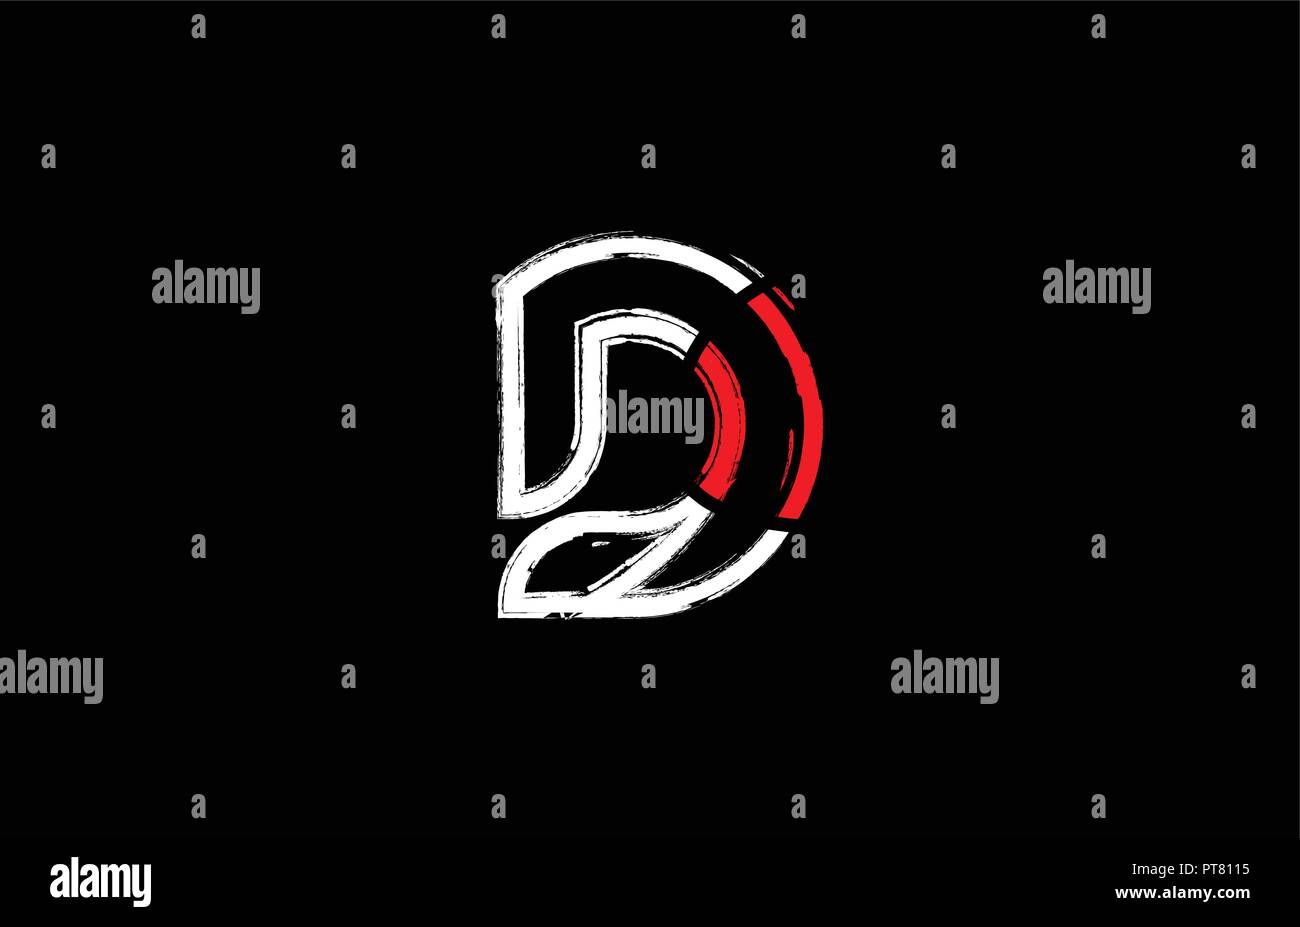 grunge alphabet letter d logo design in white red and black colors suitable for a company or business Stock Vector